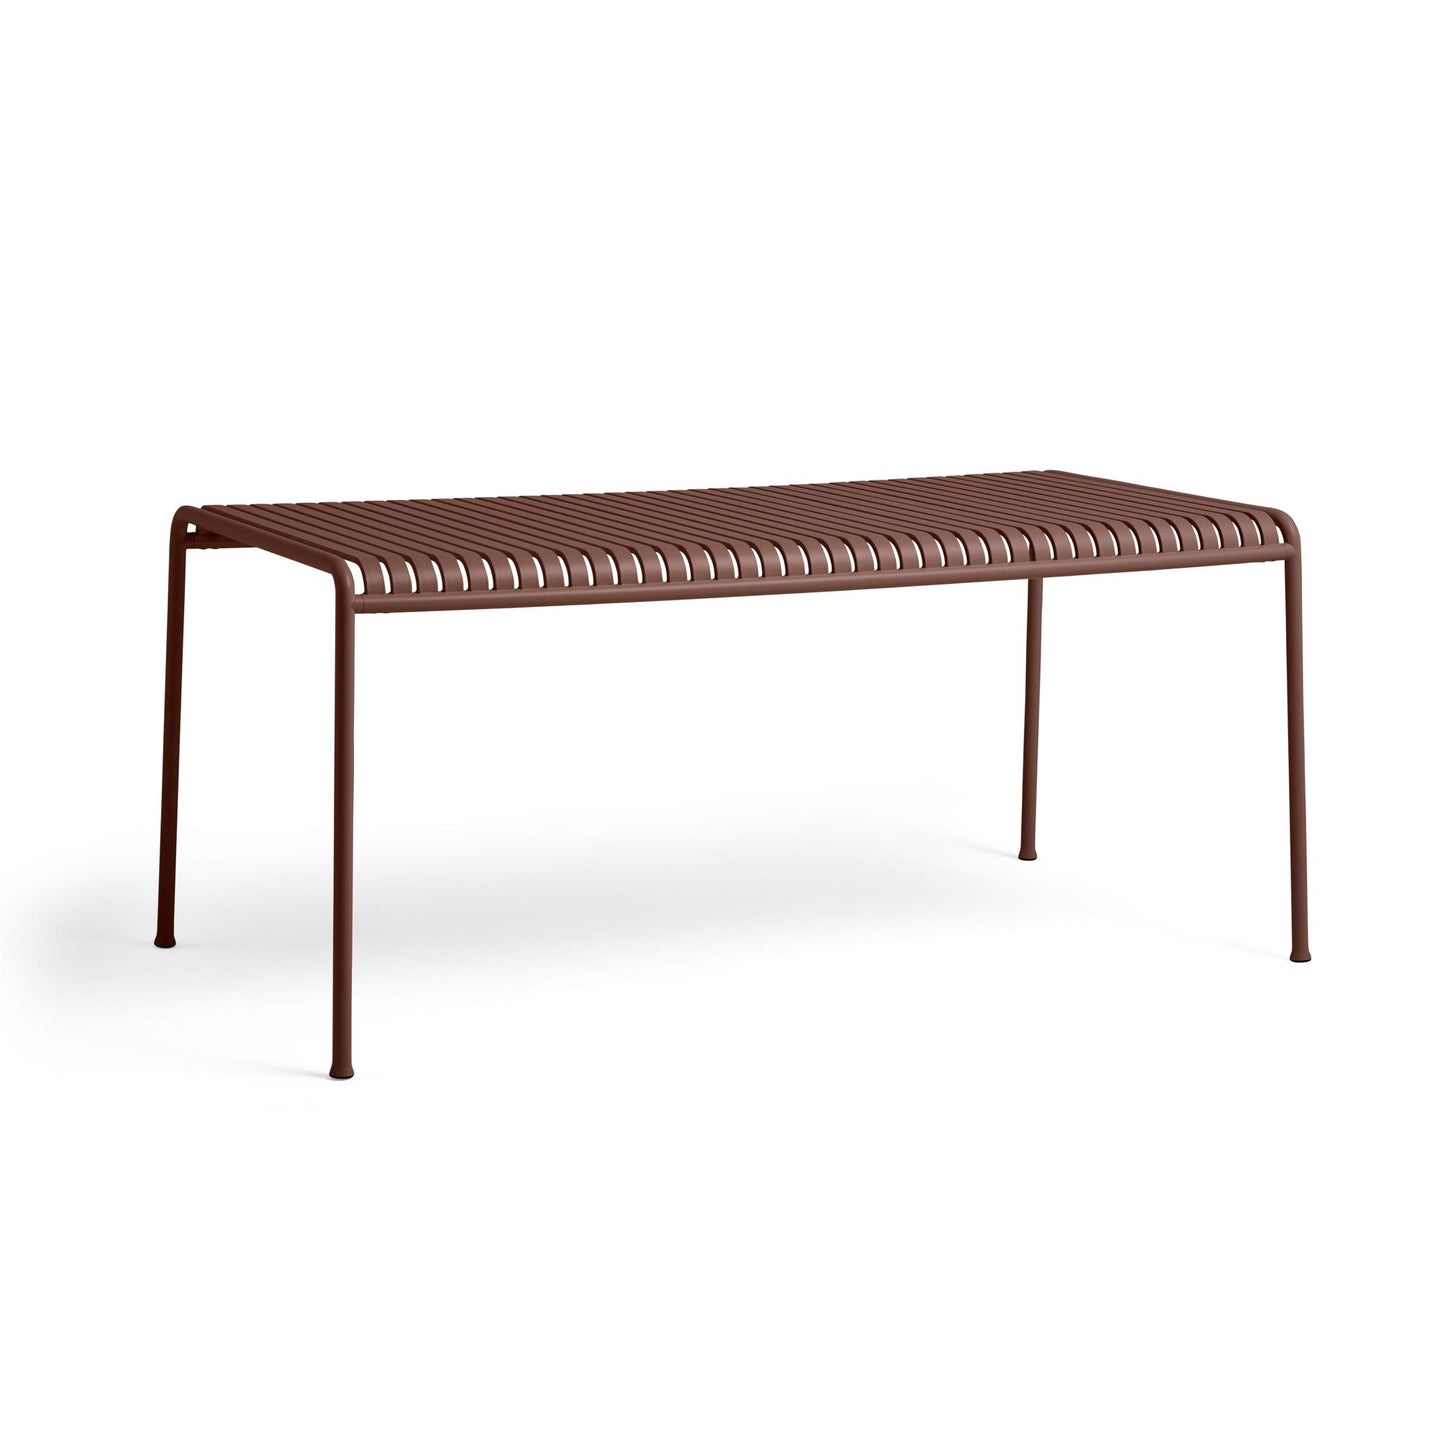 Palisade Table L170 by HAY #Iron Red